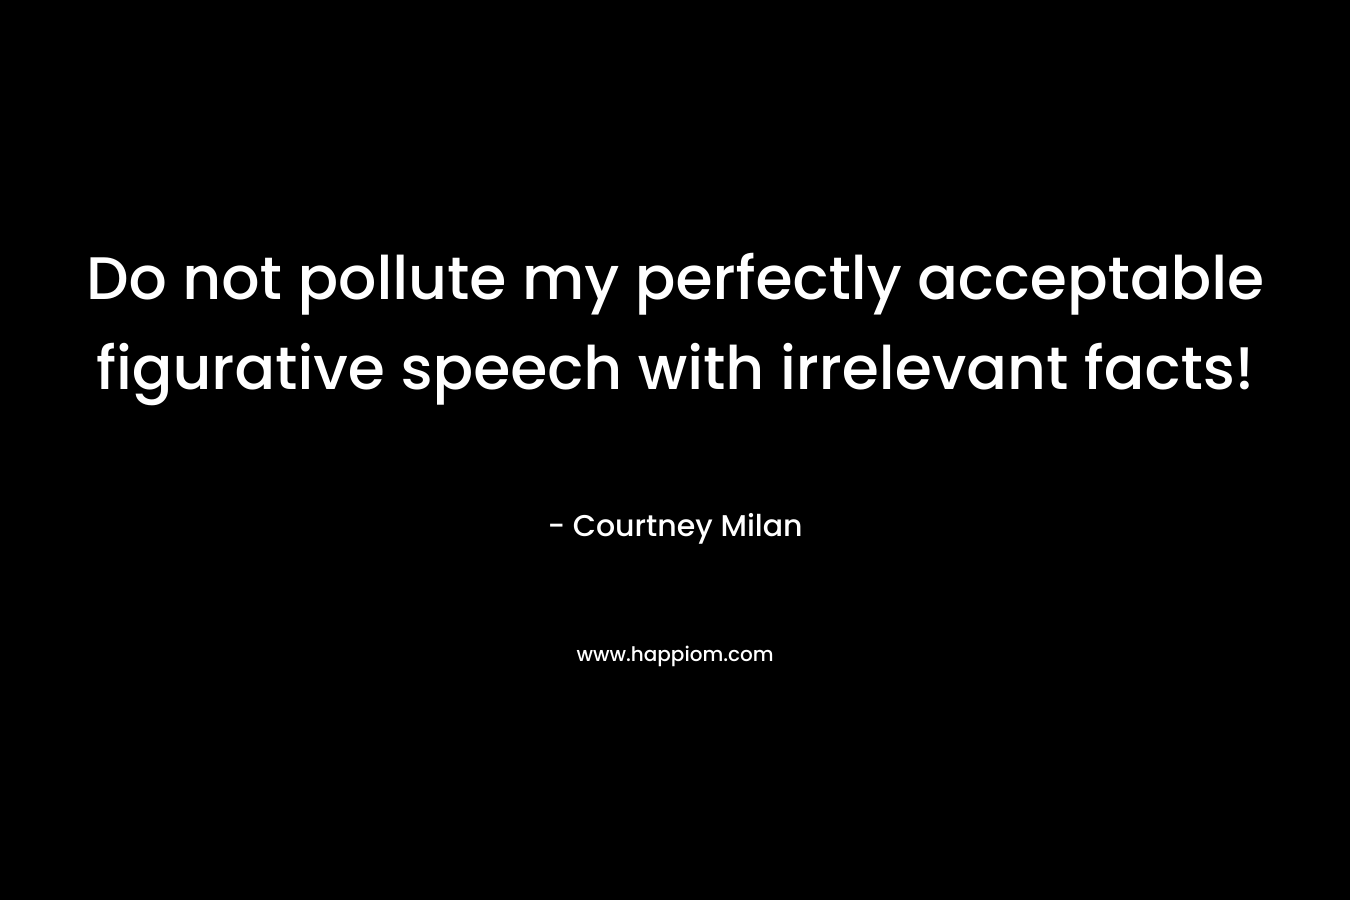 Do not pollute my perfectly acceptable figurative speech with irrelevant facts! – Courtney Milan